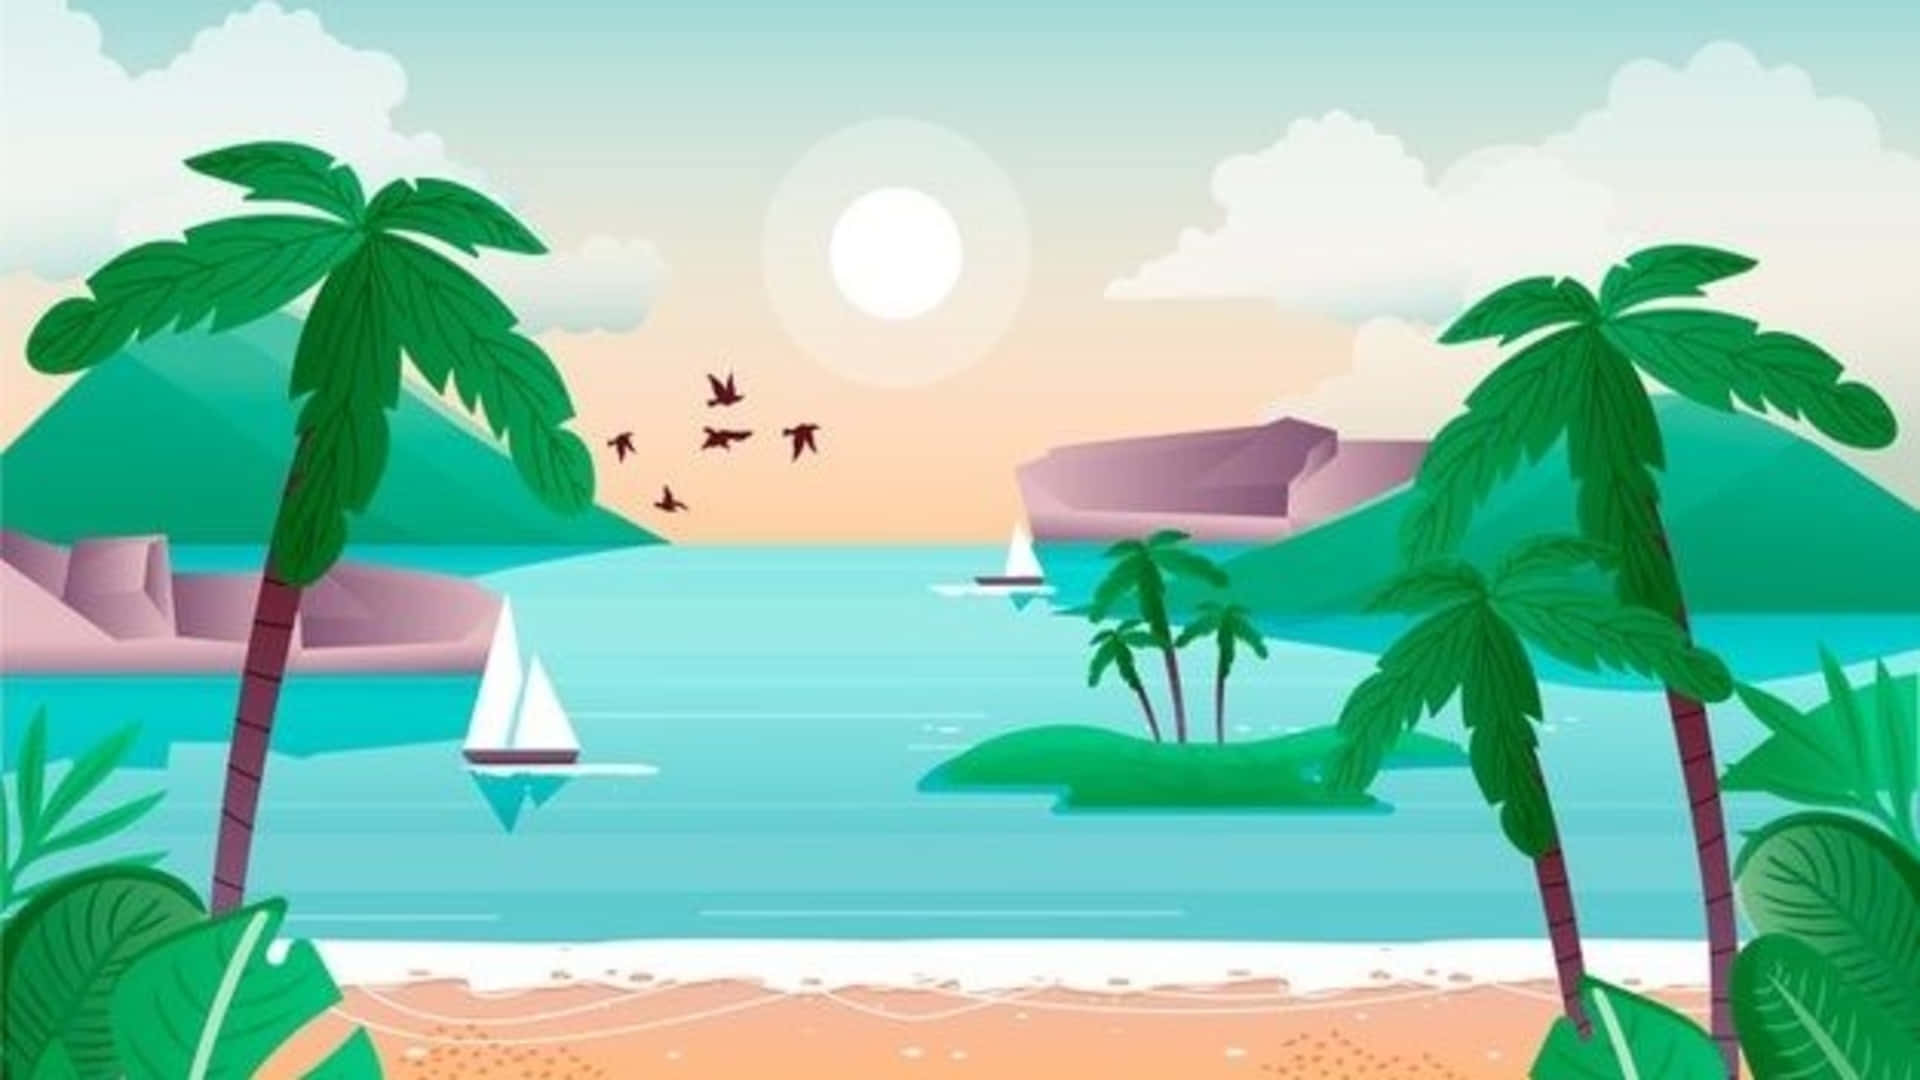 Tropical Beach Landscape With Palm Trees And Sailboats